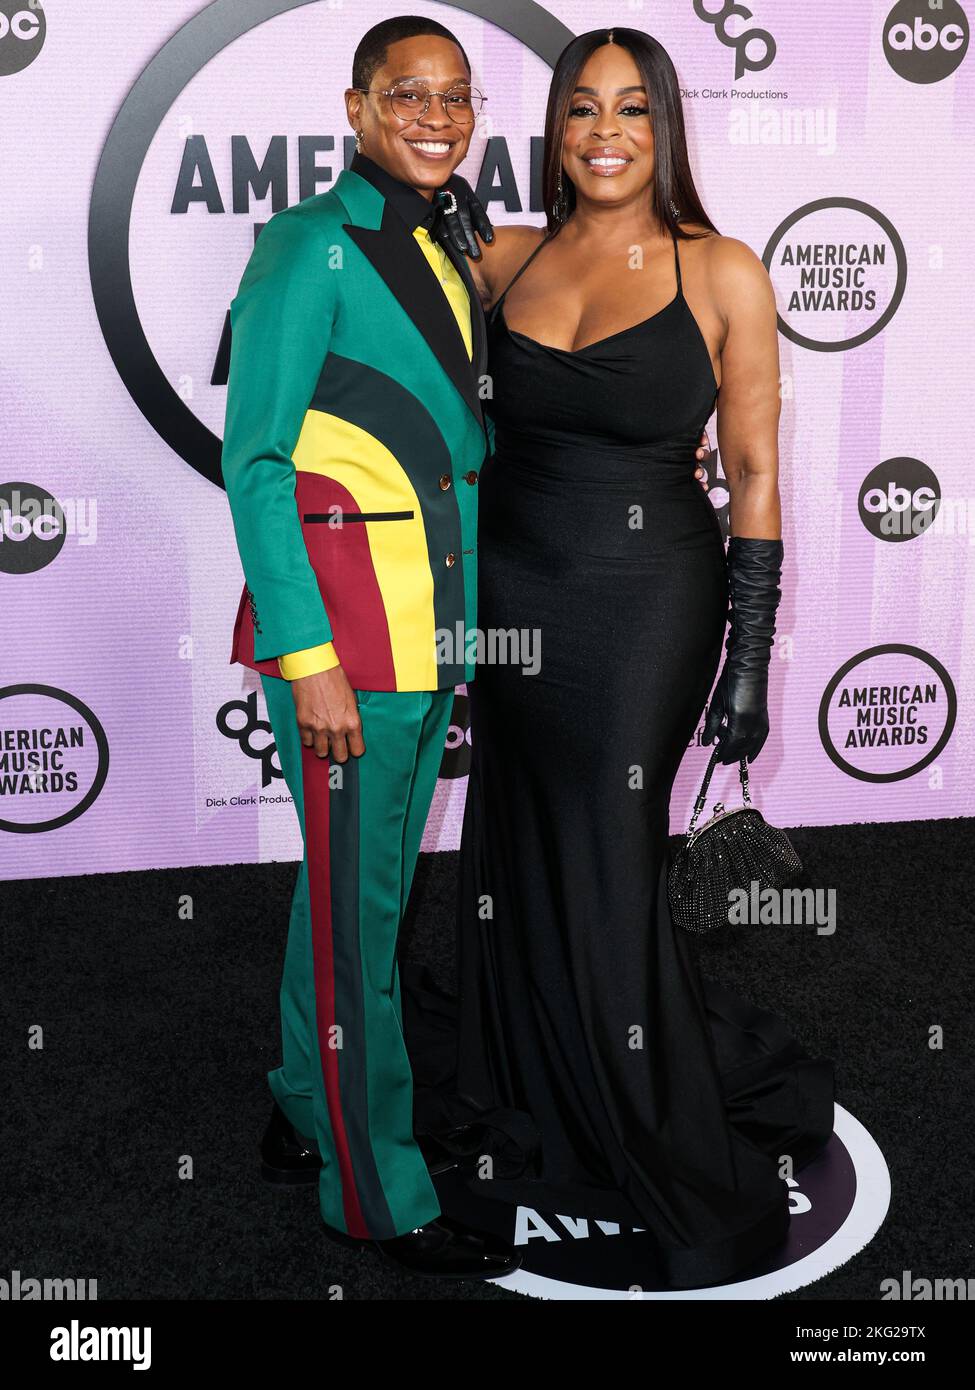 LOS ANGELES, CALIFORNIA, USA - NOVEMBER 20: Jessica Betts and wife Niecy Nash Betts arrive at the 2022 American Music Awards (50th Annual American Music Awards) held at Microsoft Theater at L.A. Live on November 20, 2022 in Los Angeles, California, United States. (Photo by Xavier Collin/Image Press Agency) Stock Photo